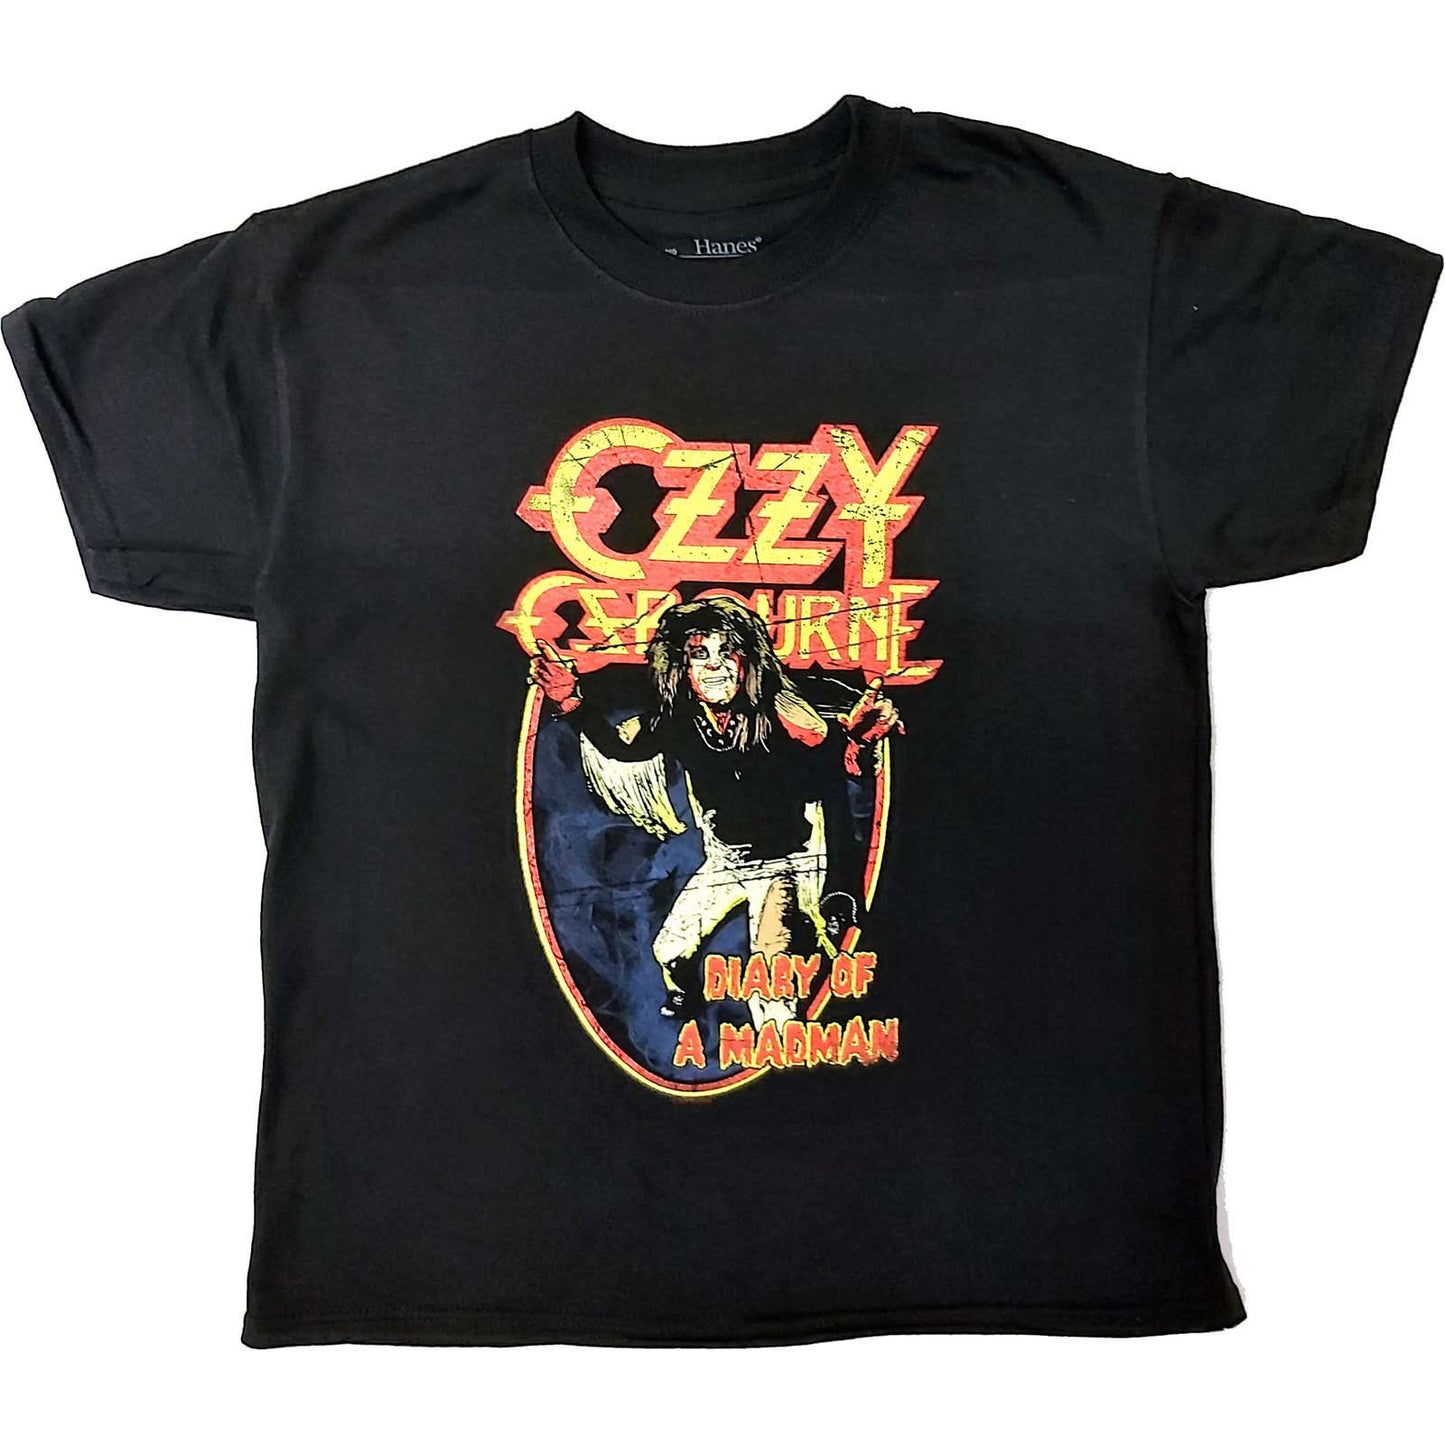 Ozzy Osbourne T-Shirt: Vintage Diary of a Madman